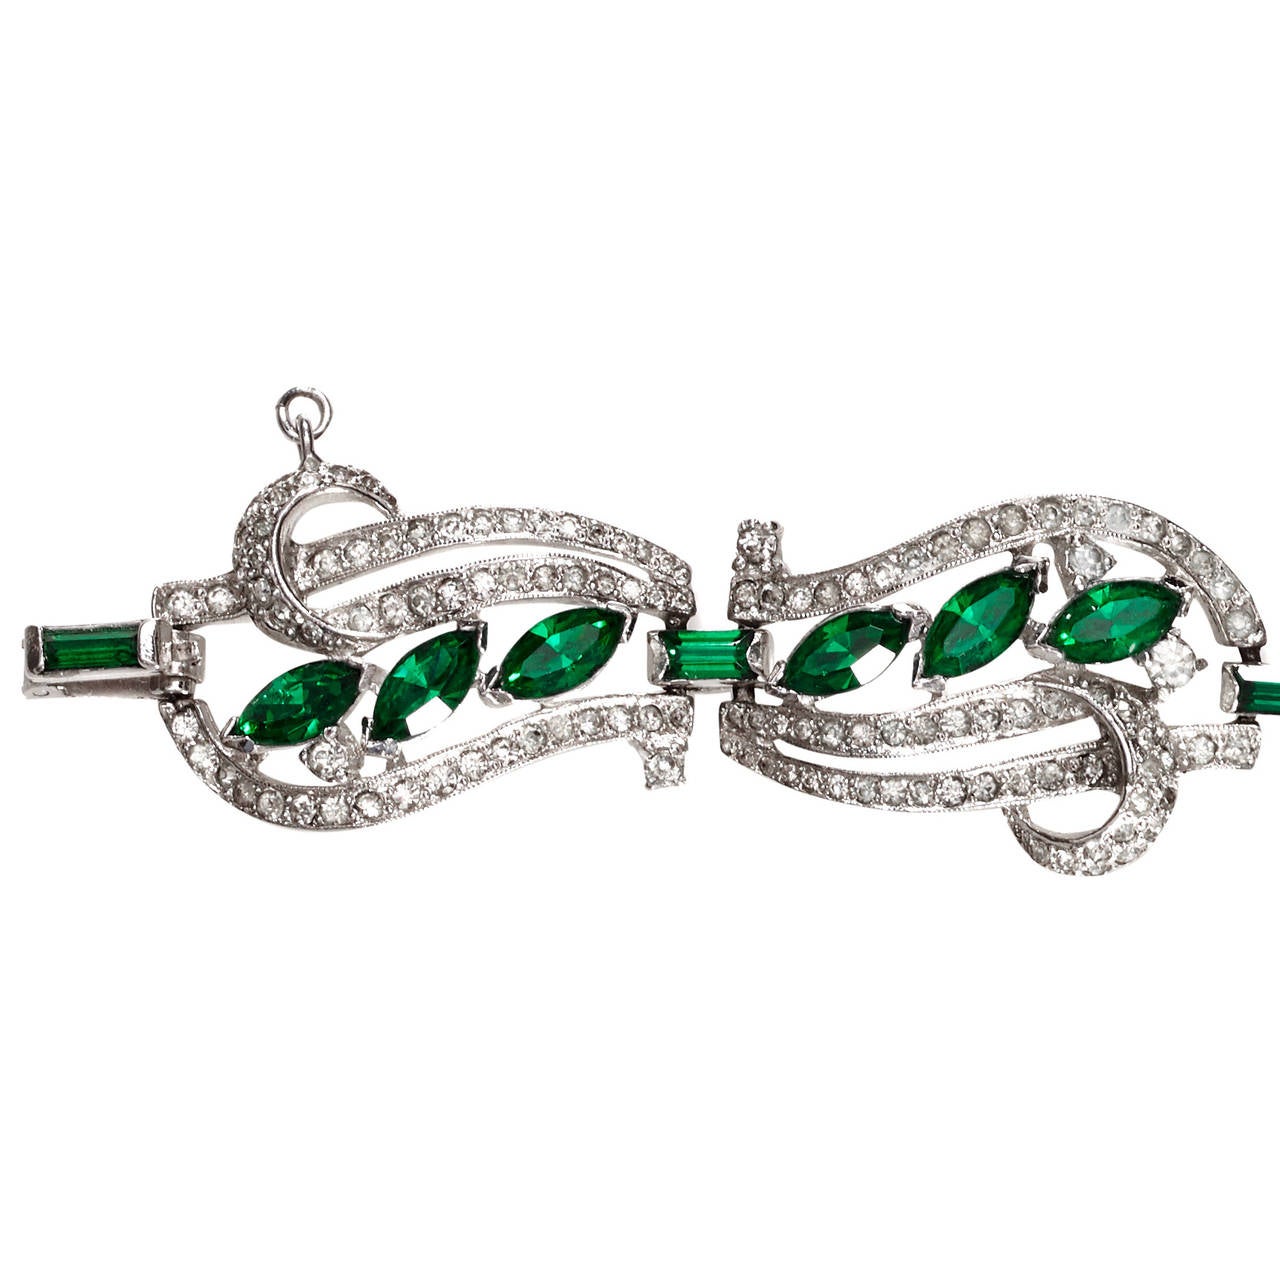 A fantastic emerald and clear crystal rhinestone bracelet by Kramer of New York.

The delicate undulating openwork design is rhodium plated and made up of six articulated panels, decorated with curlicue shapes and emerald navette shaped